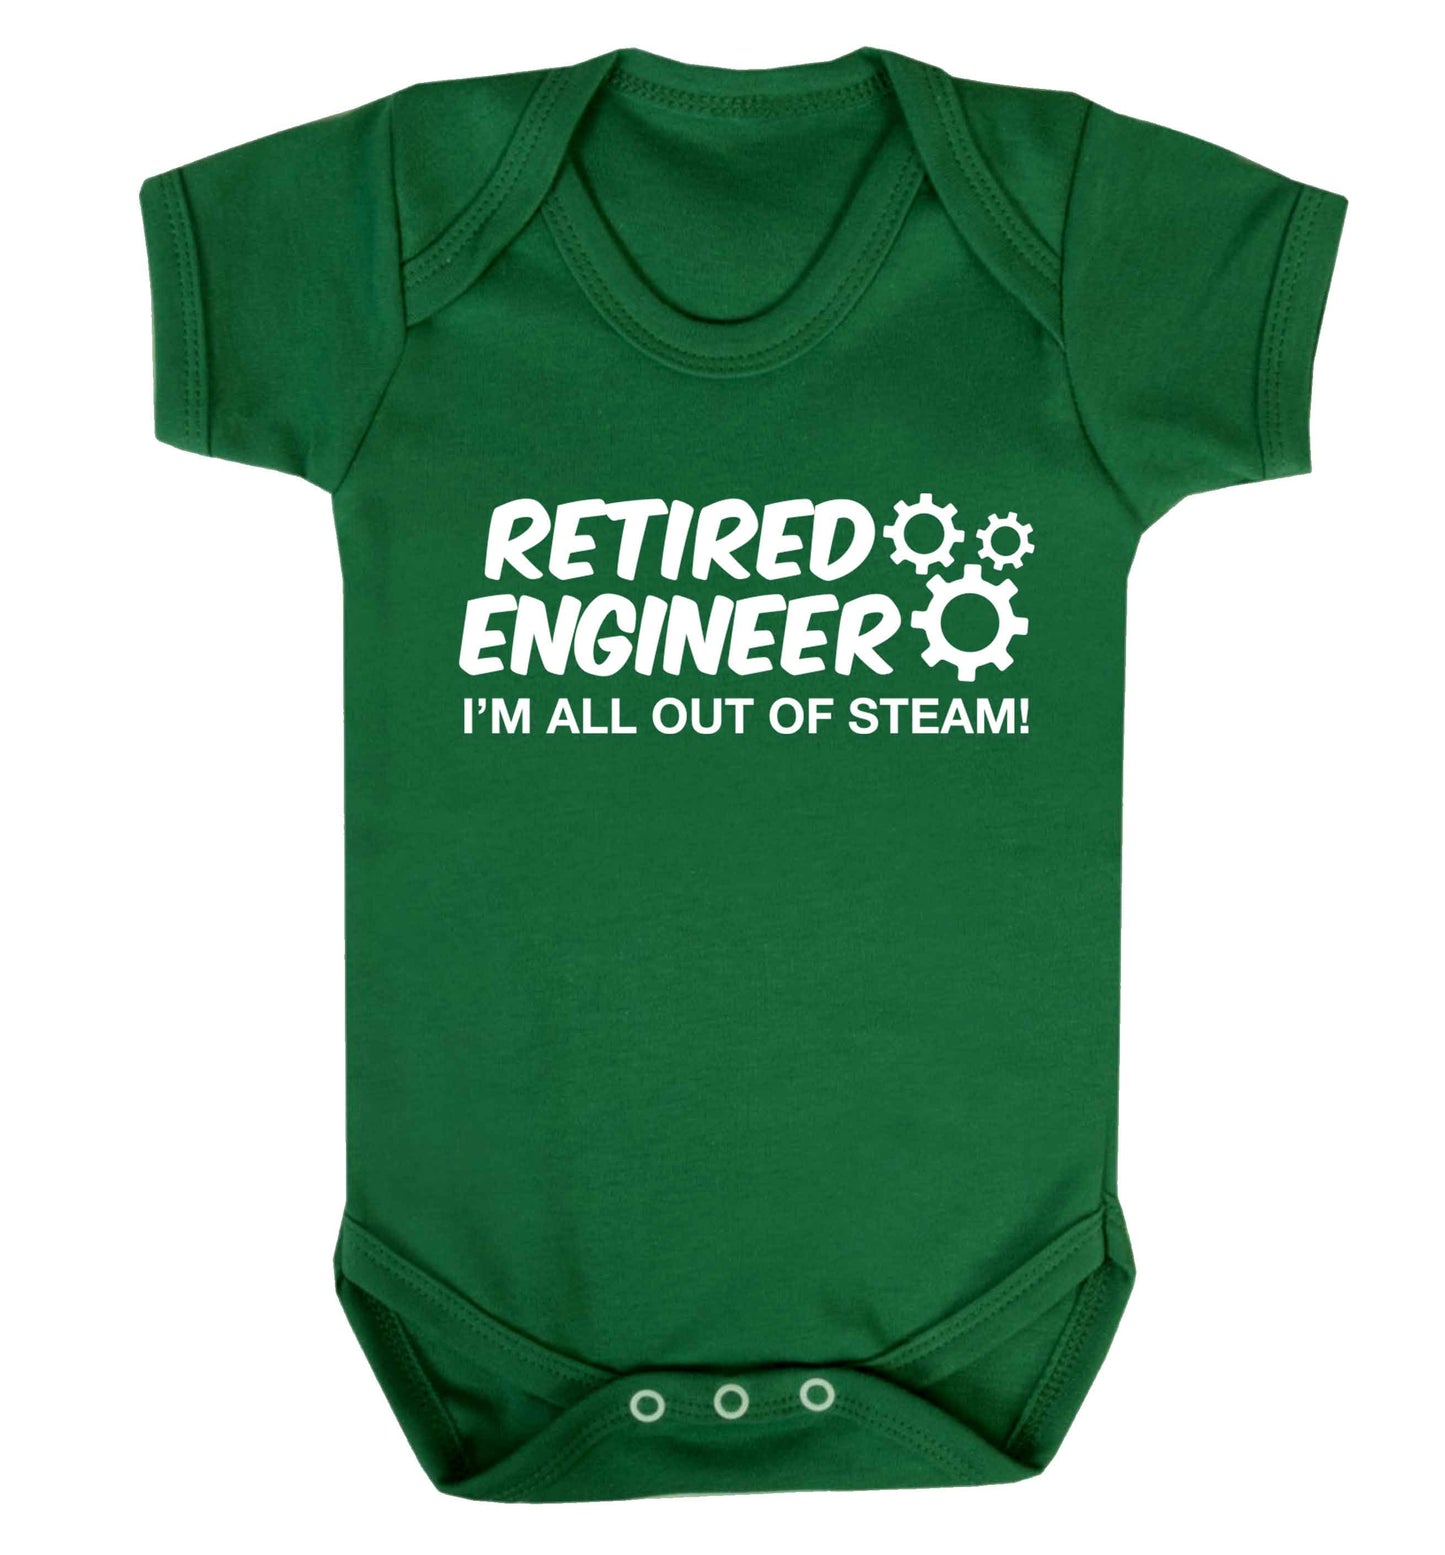 Retired engineer I'm all out of steam Baby Vest green 18-24 months